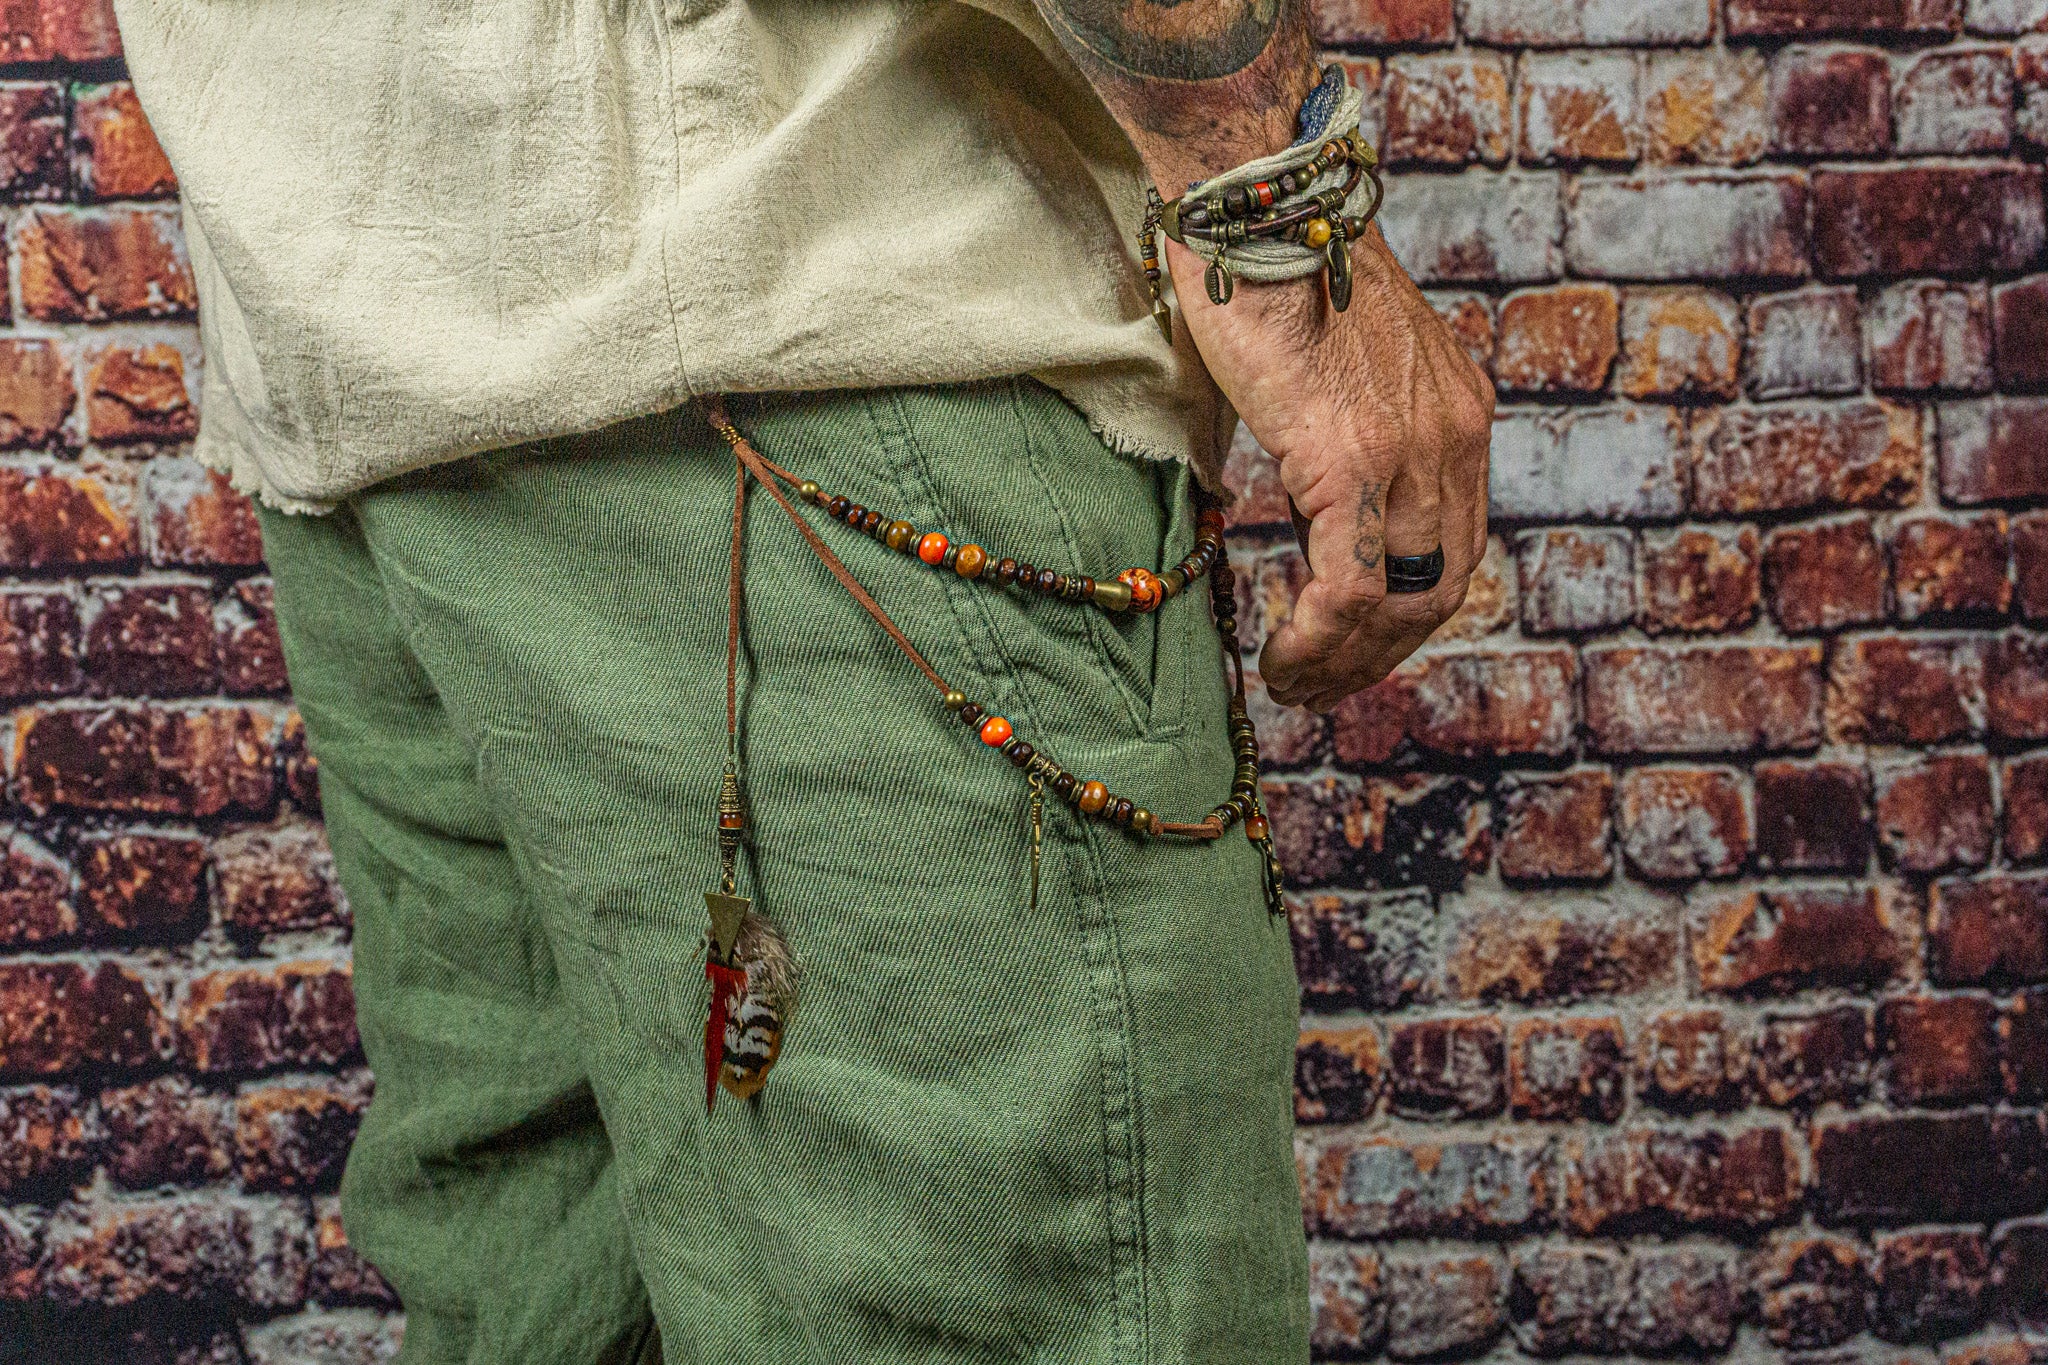 faux leather and wooden bead layered pants keychain with feathers and bronze dangle charms- wander jewellery